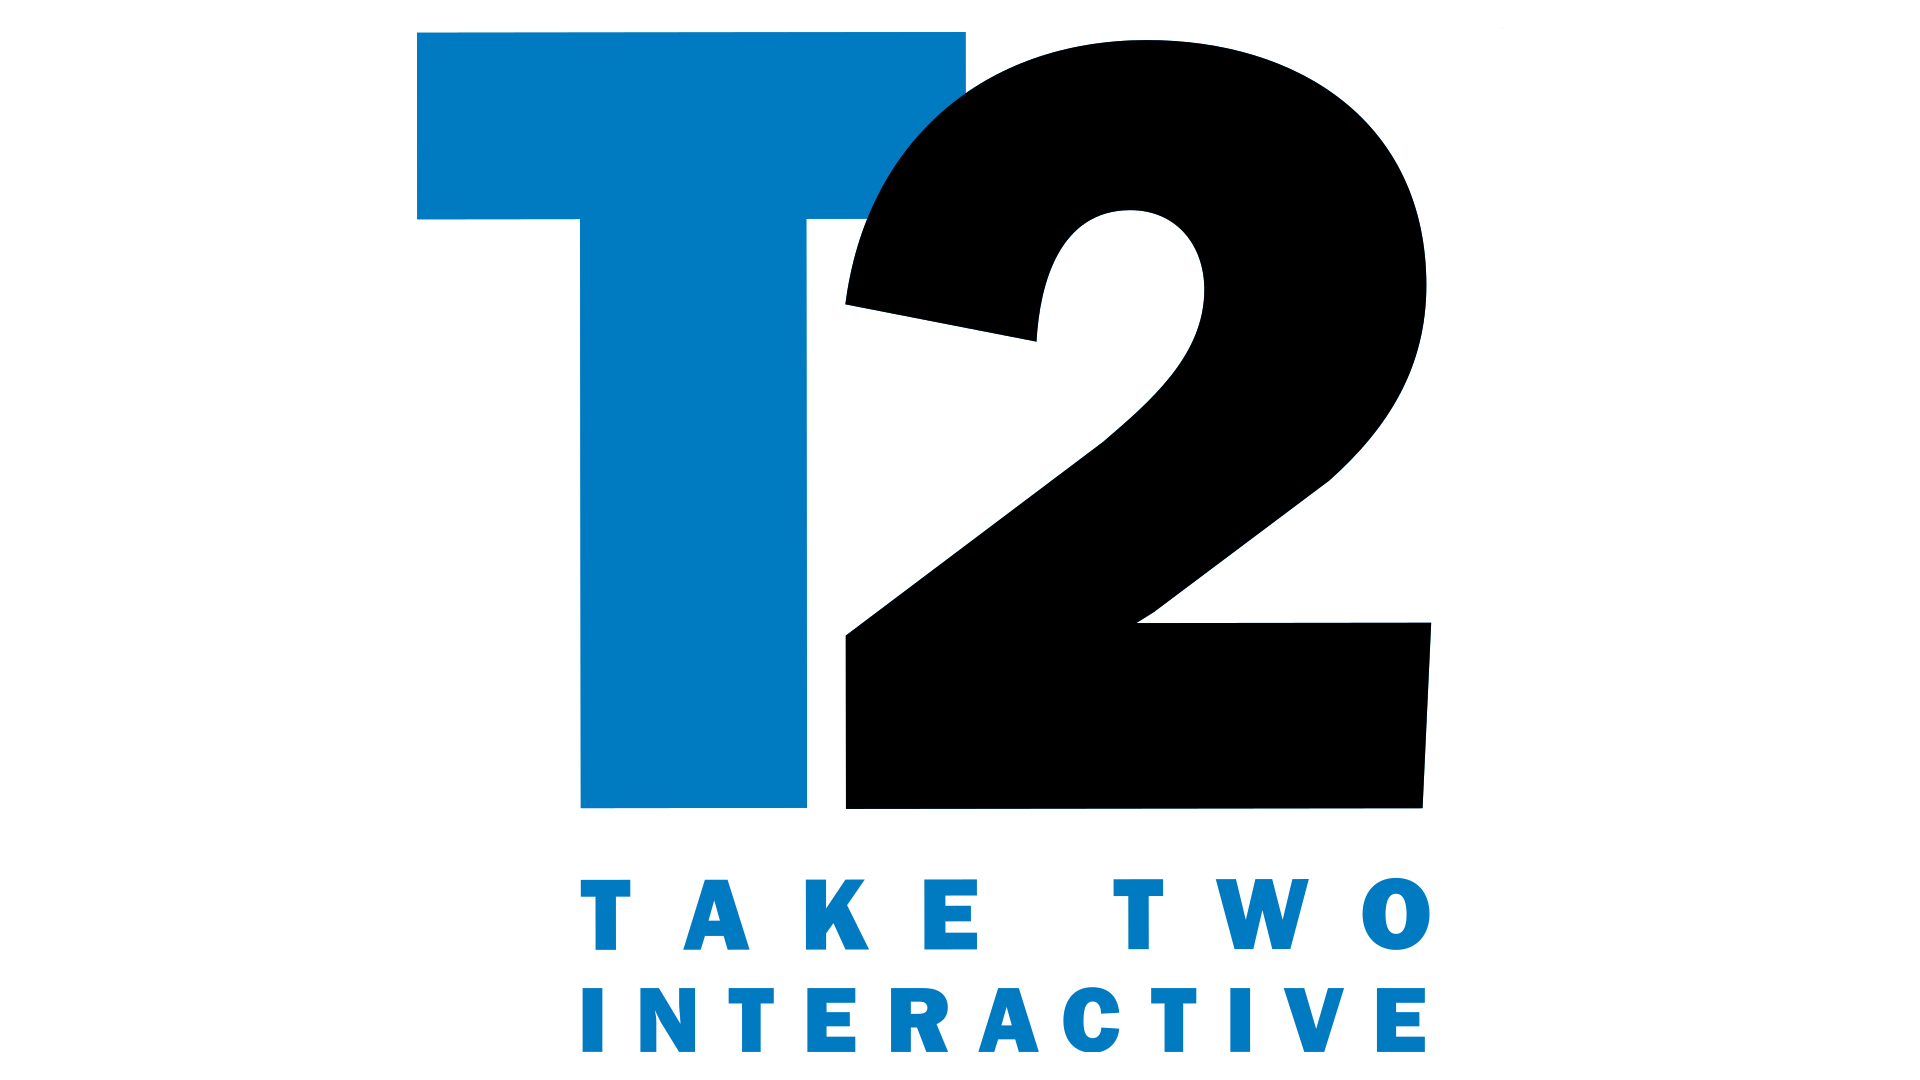 Take-Two boss: “we will not tolerate bad behaviour of any kind”